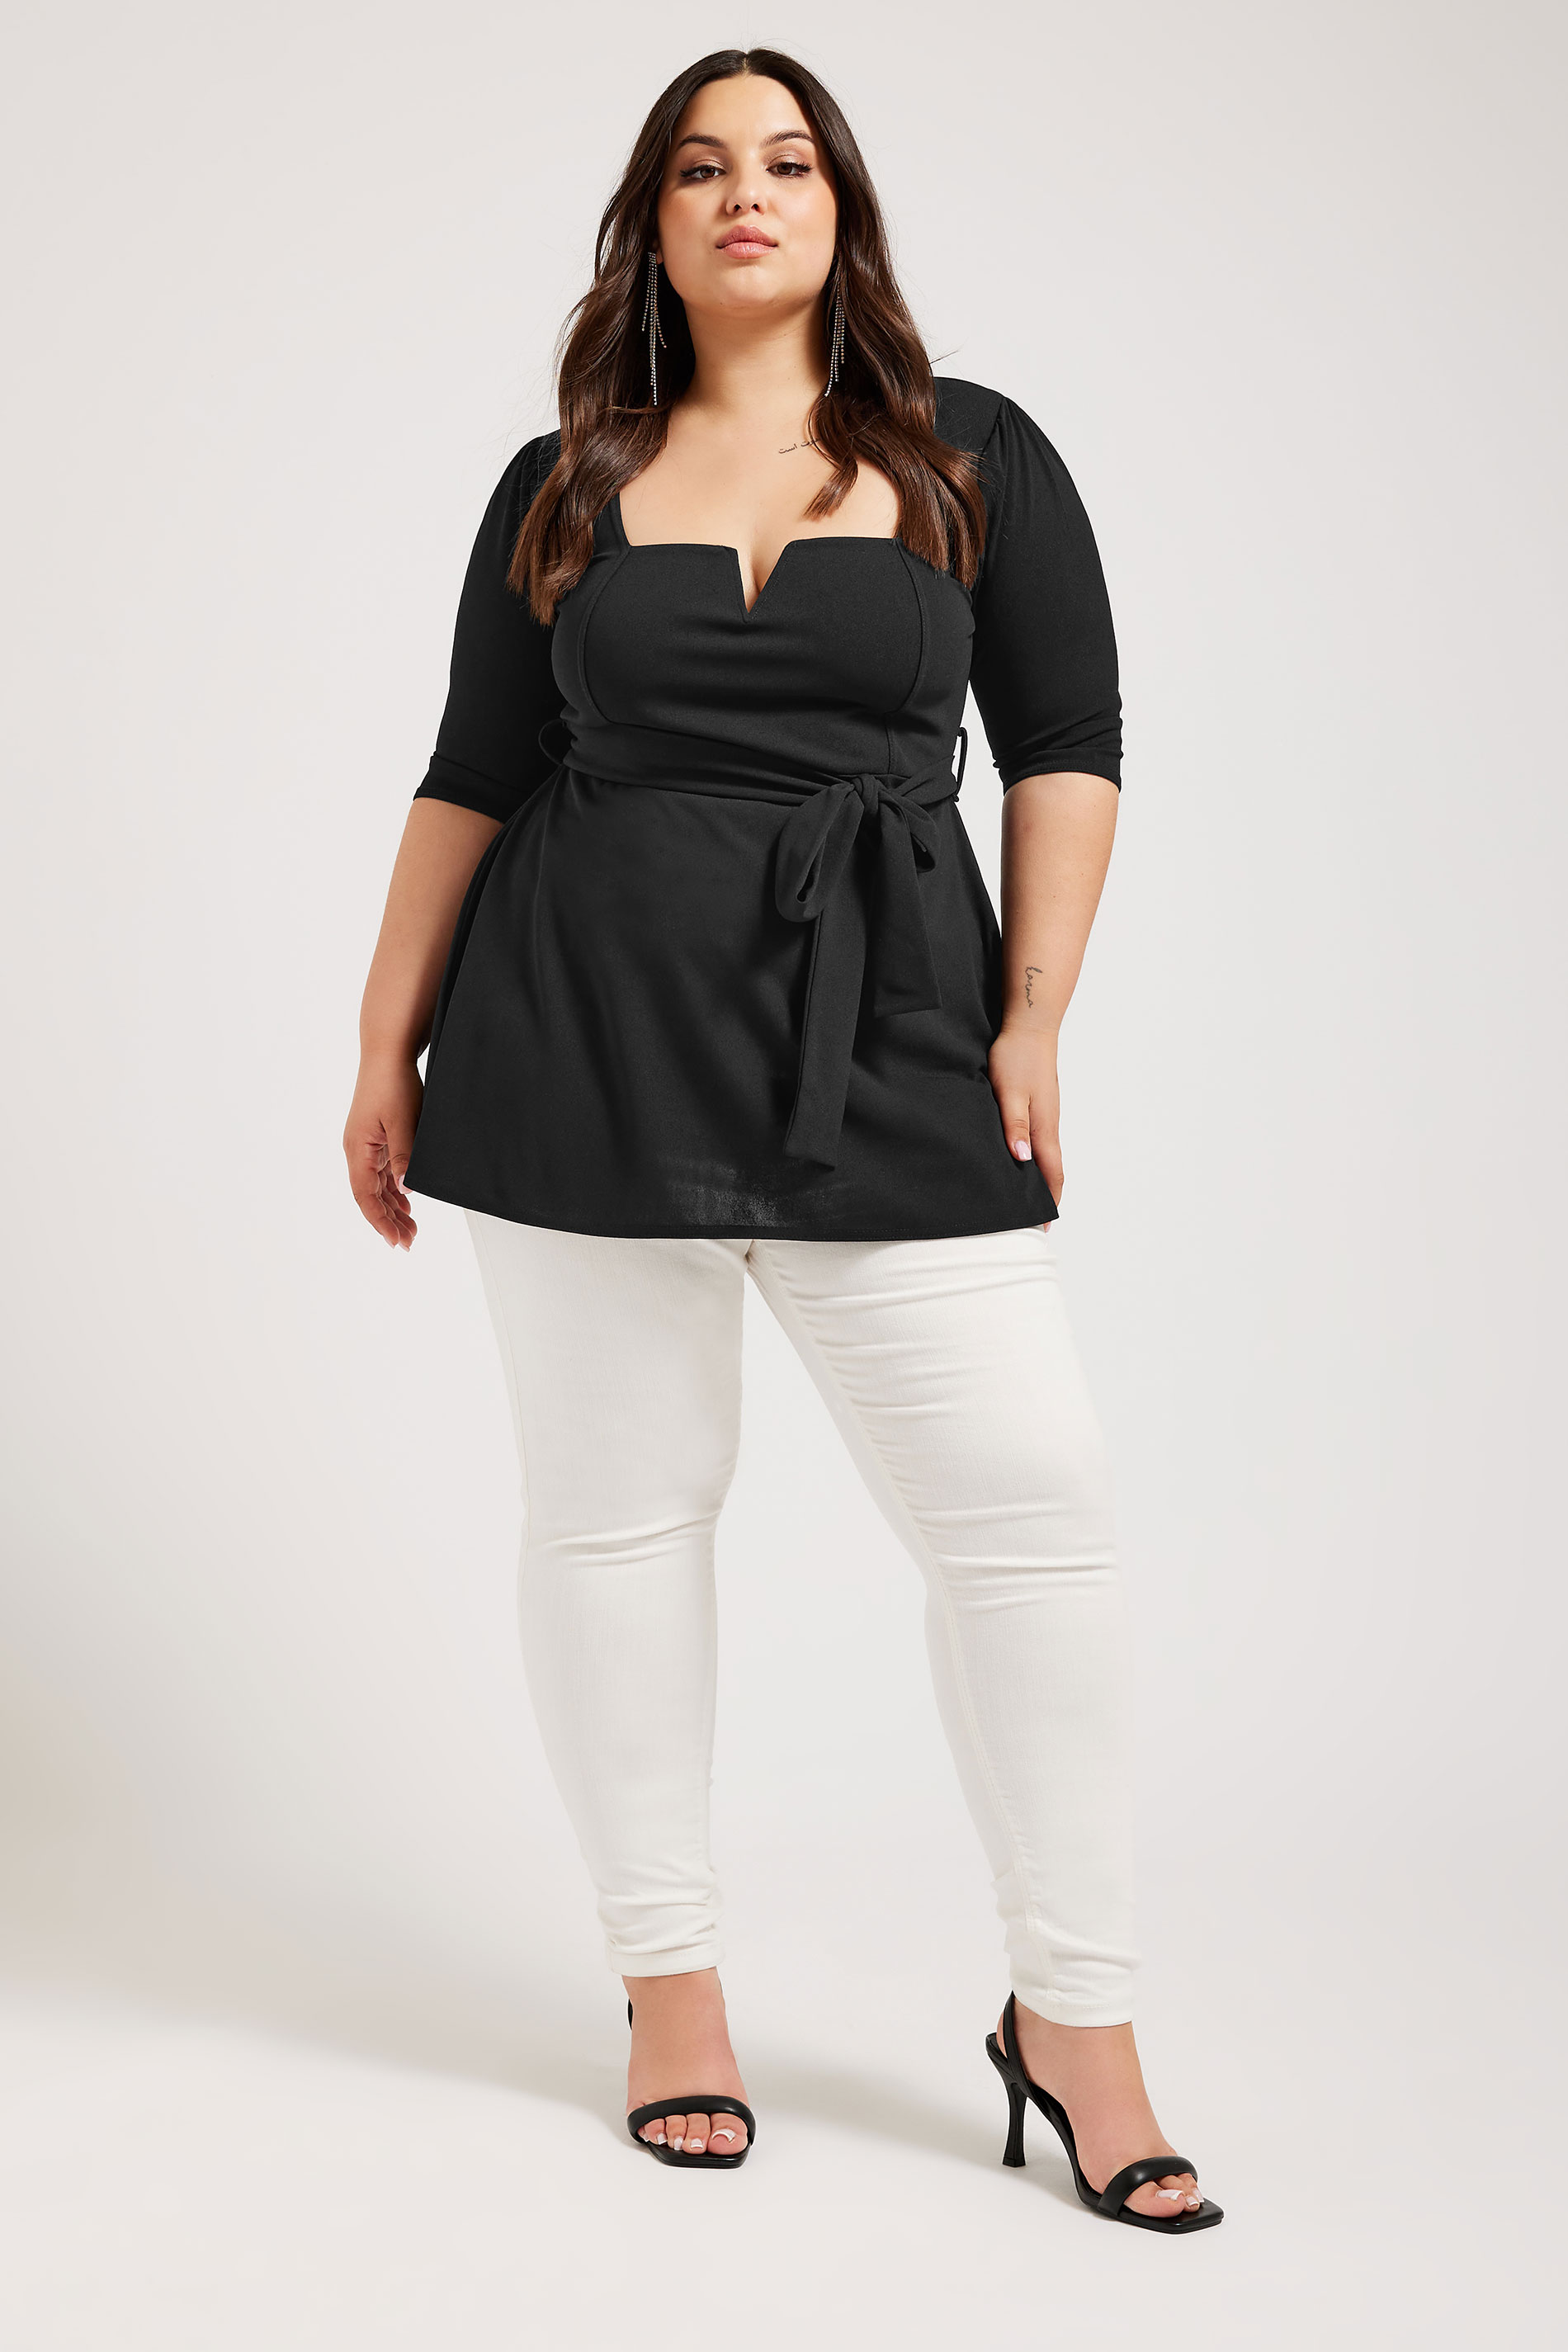 YOURS LONDON Plus Size Black Notch Neck Peplum Top | Yours Clothing 1